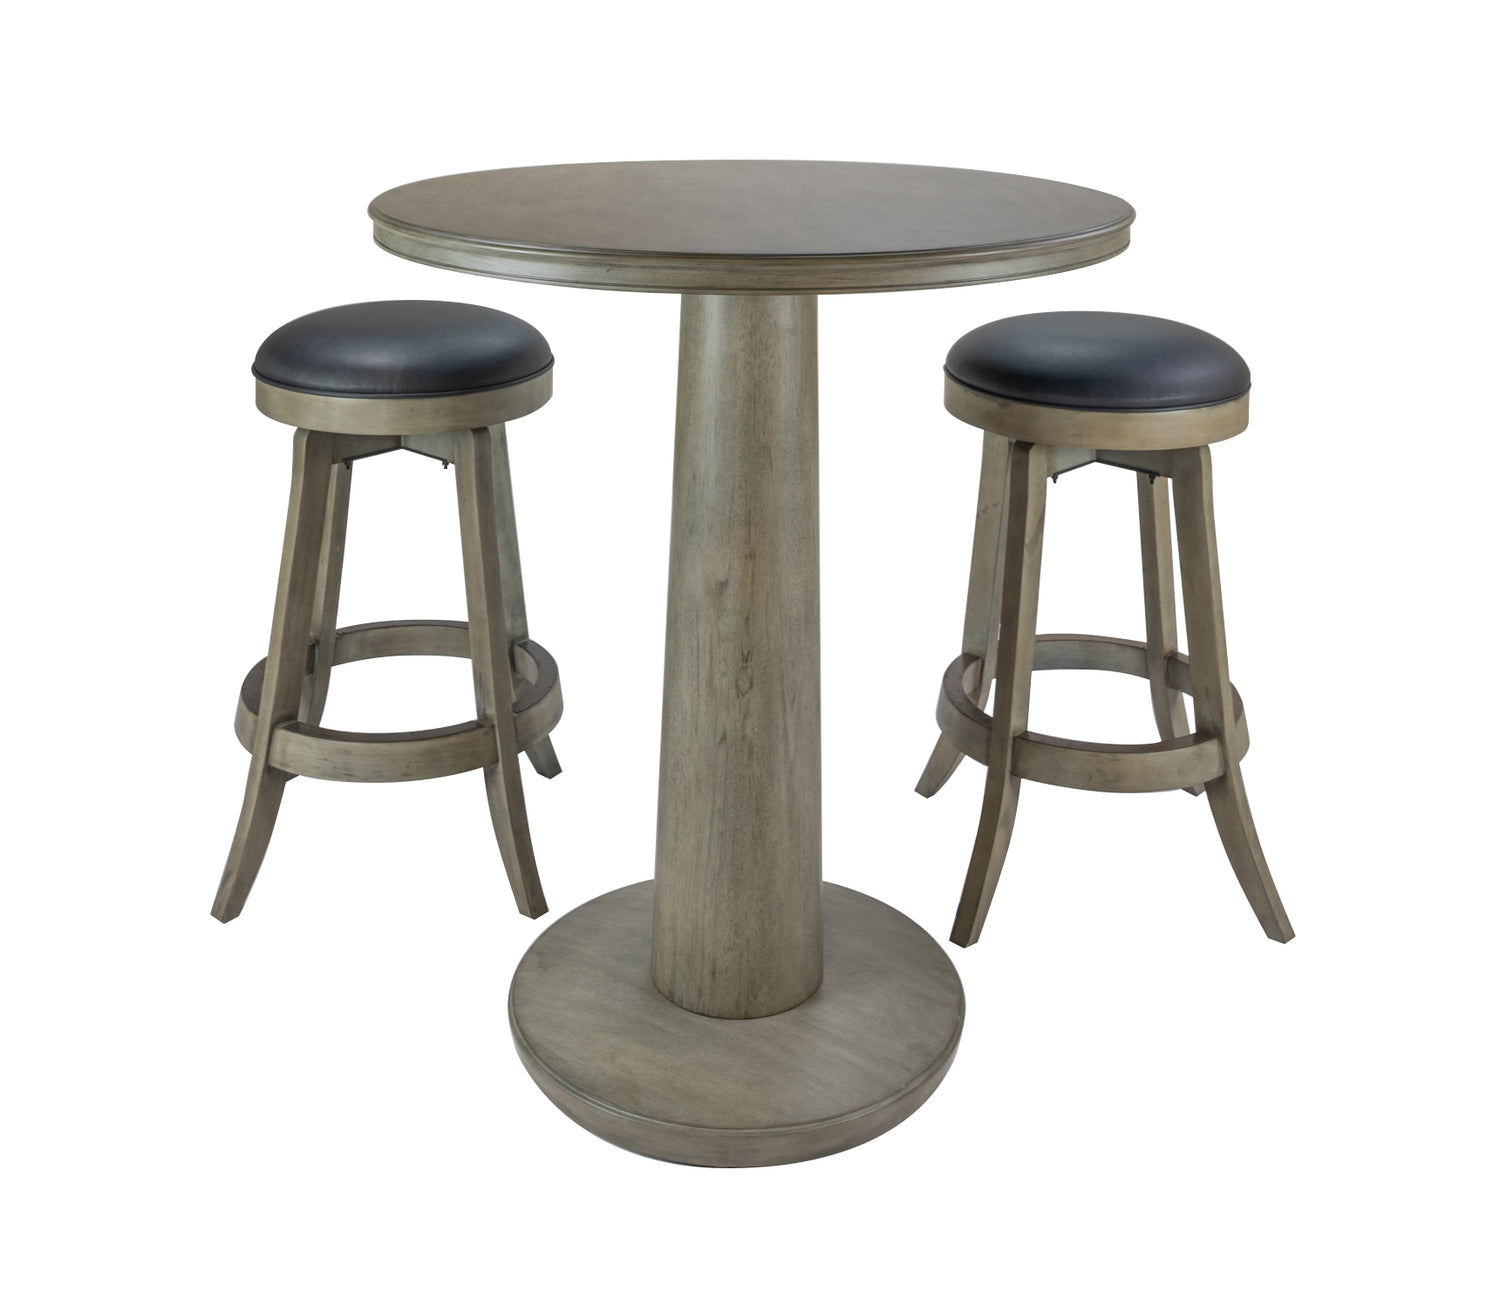 Legacy Billiards Collins Pub Table in Overcast Finish with Classic Backless Barstools